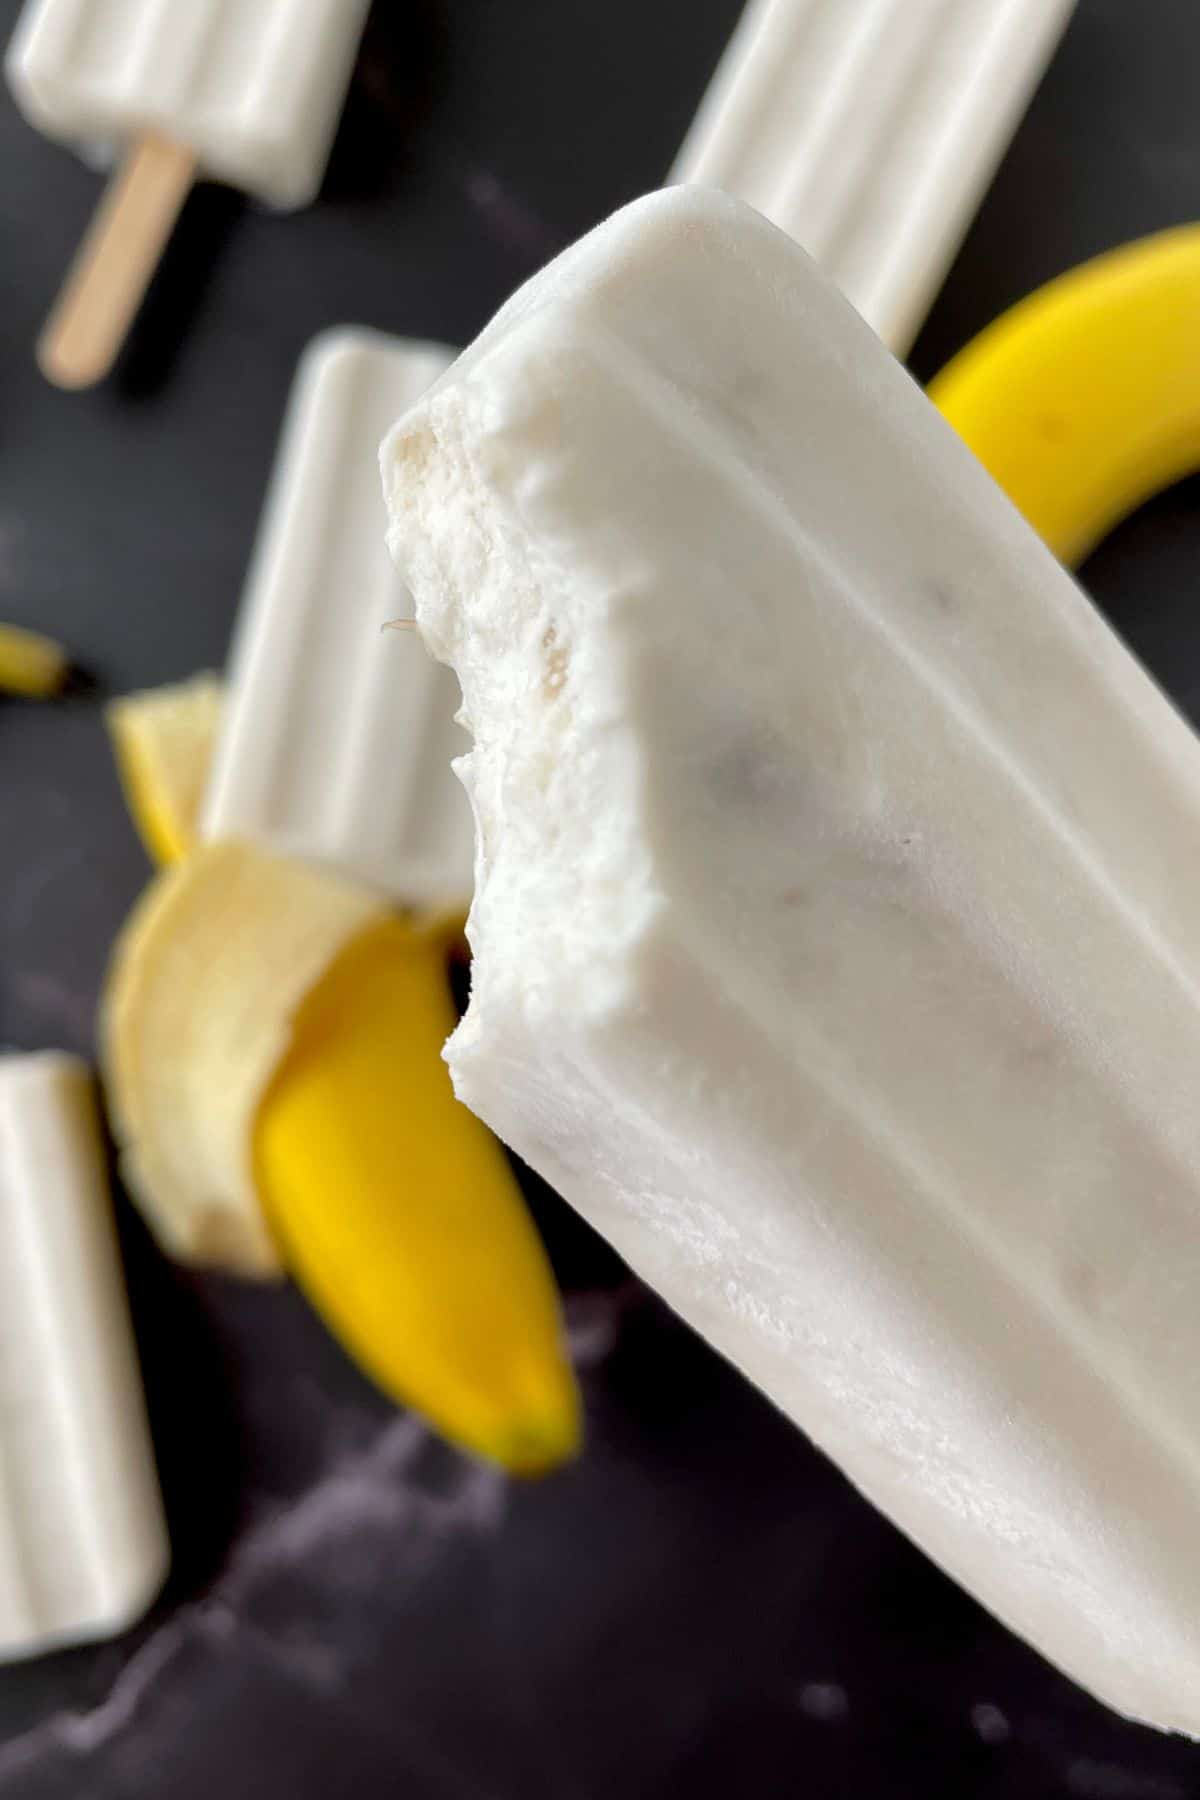 sugar free banana popsicle with a bite.